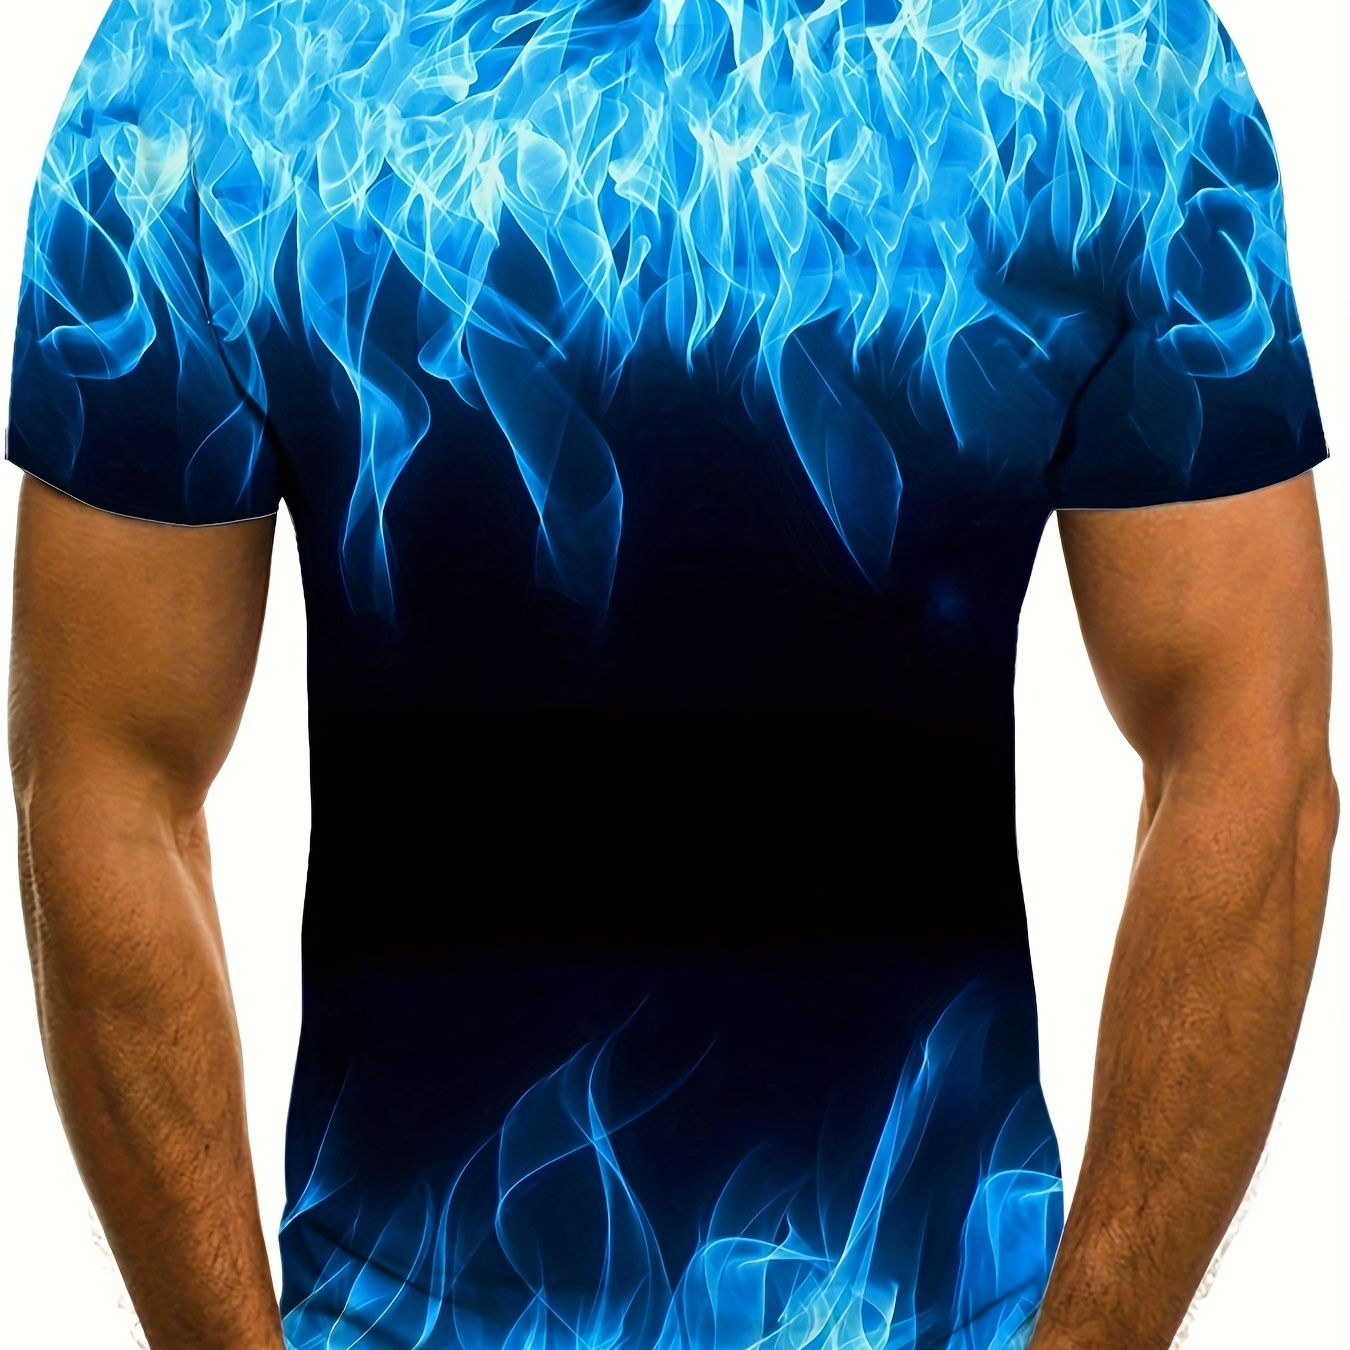 

3d Fire Print, Men's Graphic Design Crew Neck Active T-shirt, Casual Comfy Tees Tshirts For Summer, Men's Clothing Tops For Daily Gym Workout Running